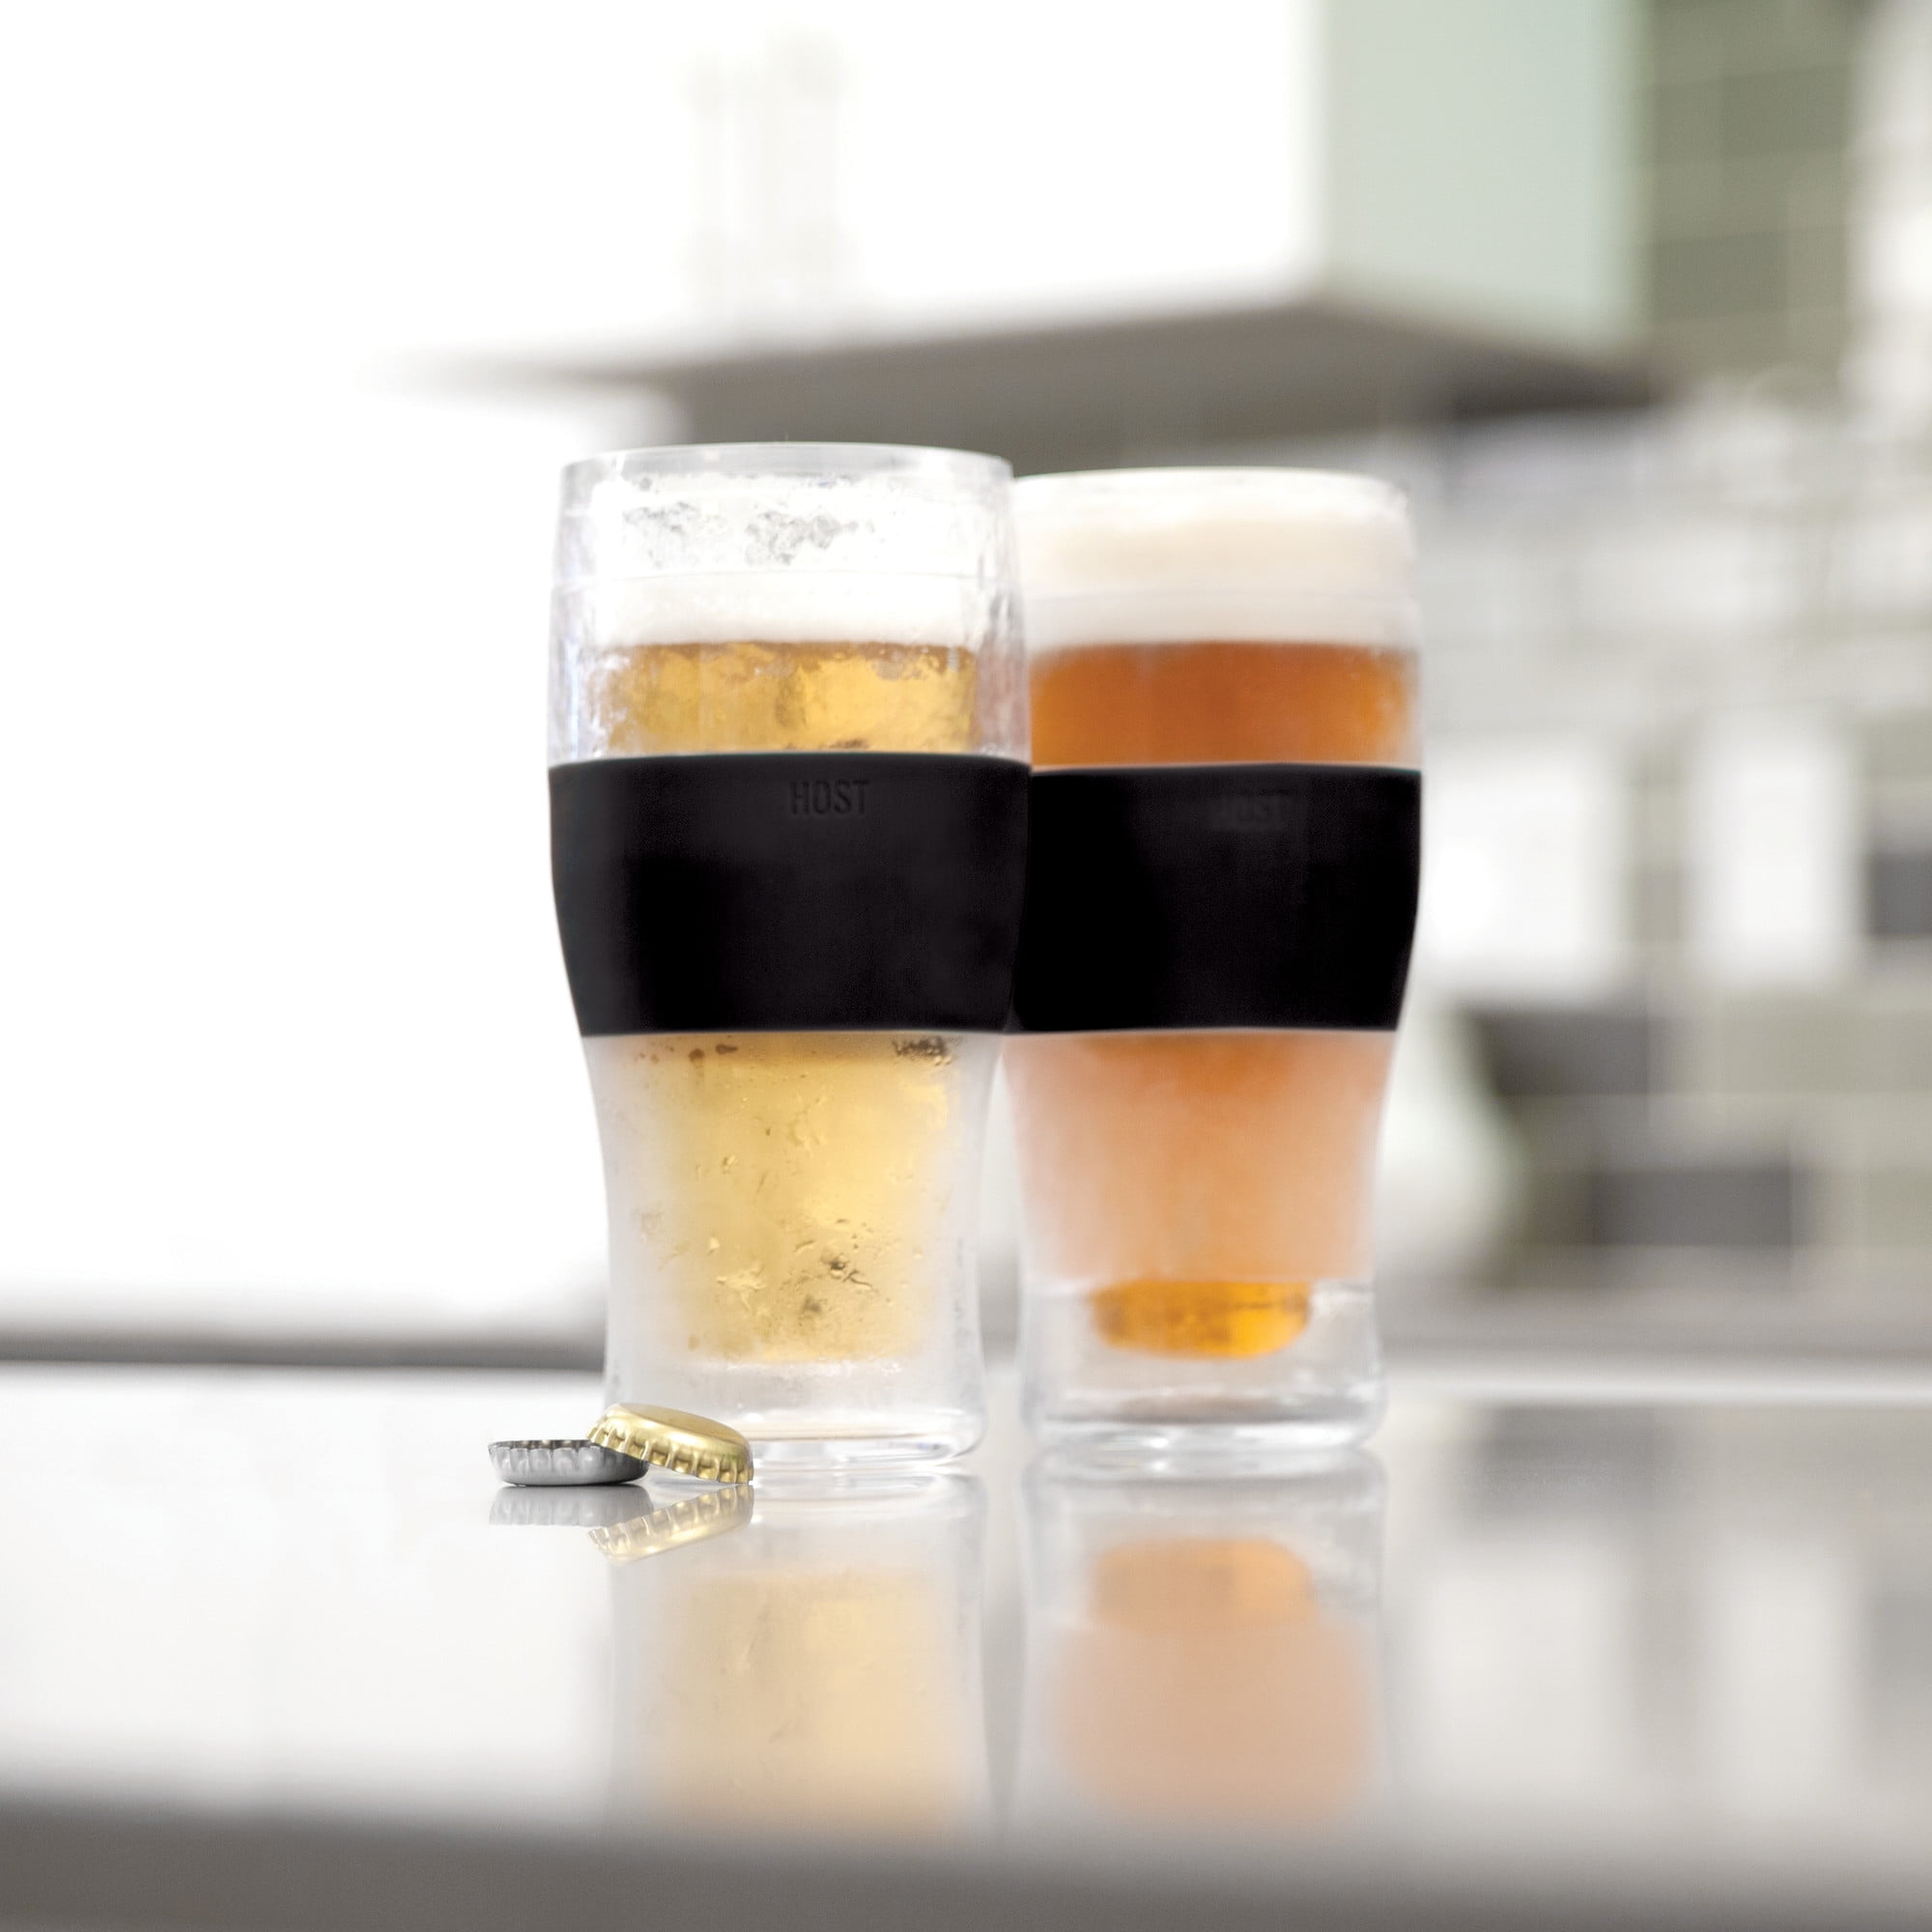 Host Freeze Beer Glasses, 16 oz, Set of 2, Black, out of package but not  used